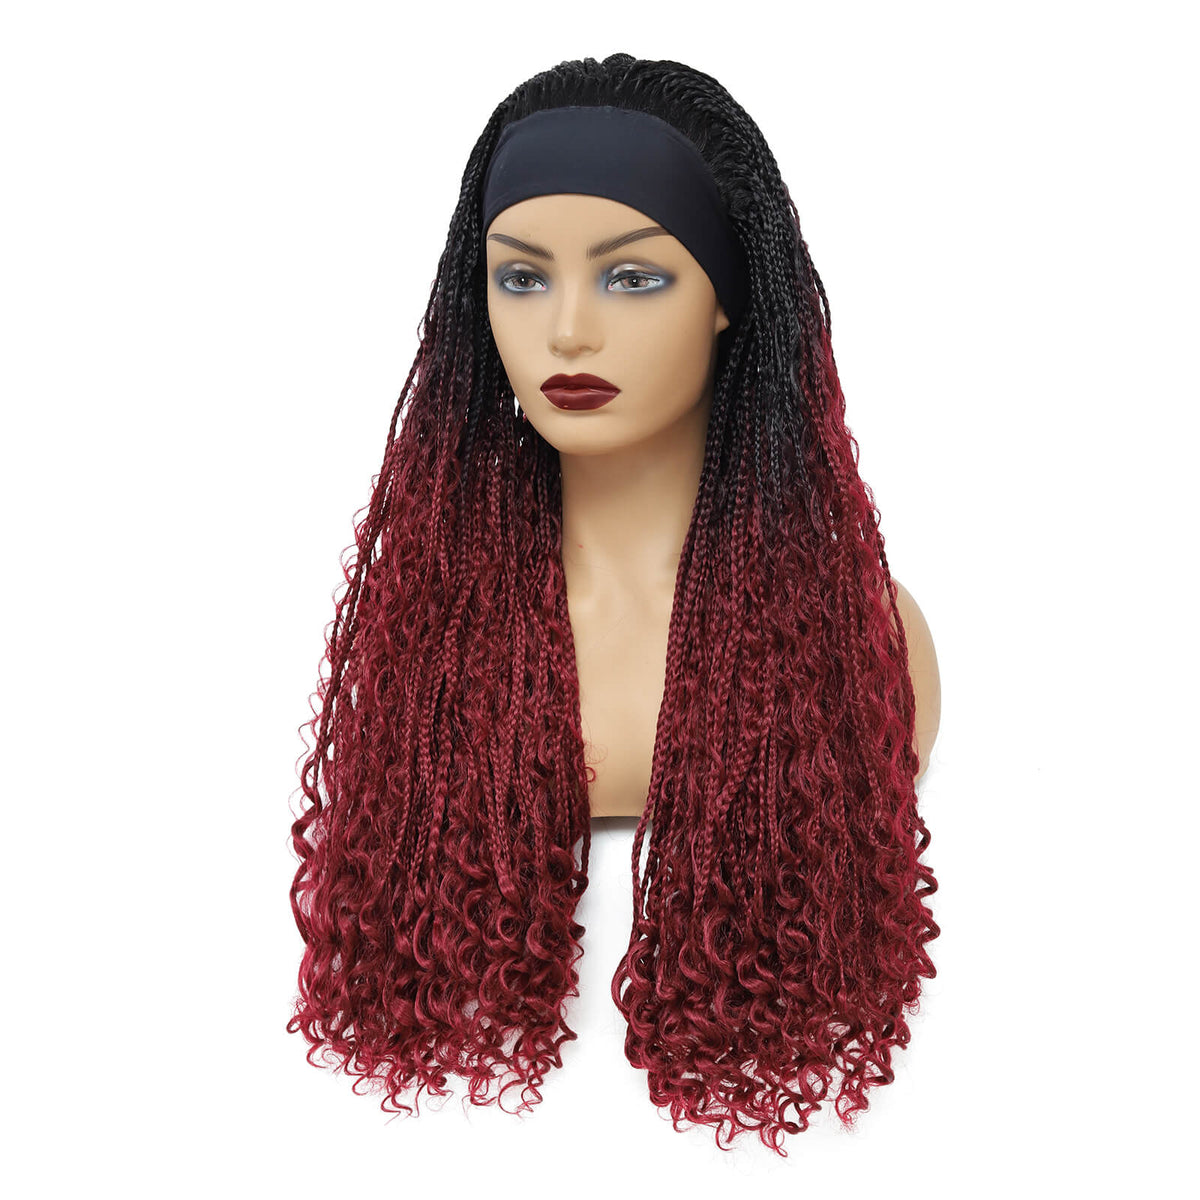 Headband Braided Wigs With Free Tress Box Braided Wigs for Black Women 99j Long Micro Braids Wig Ombre Burgundy Color